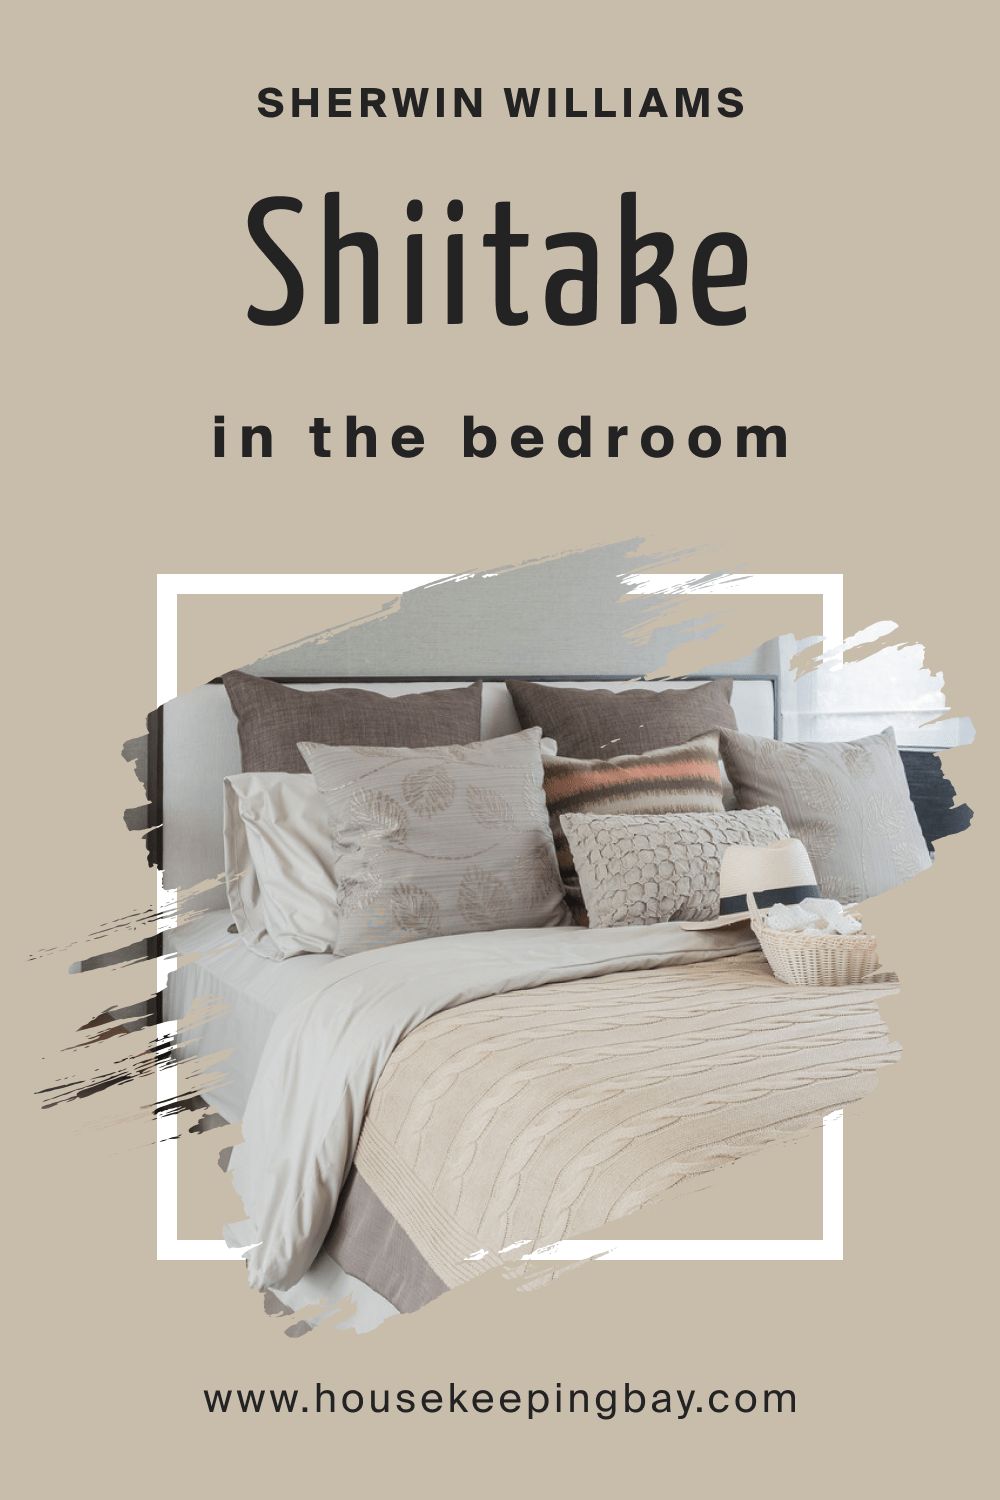 Shiitake SW 9173 in a Bedroom